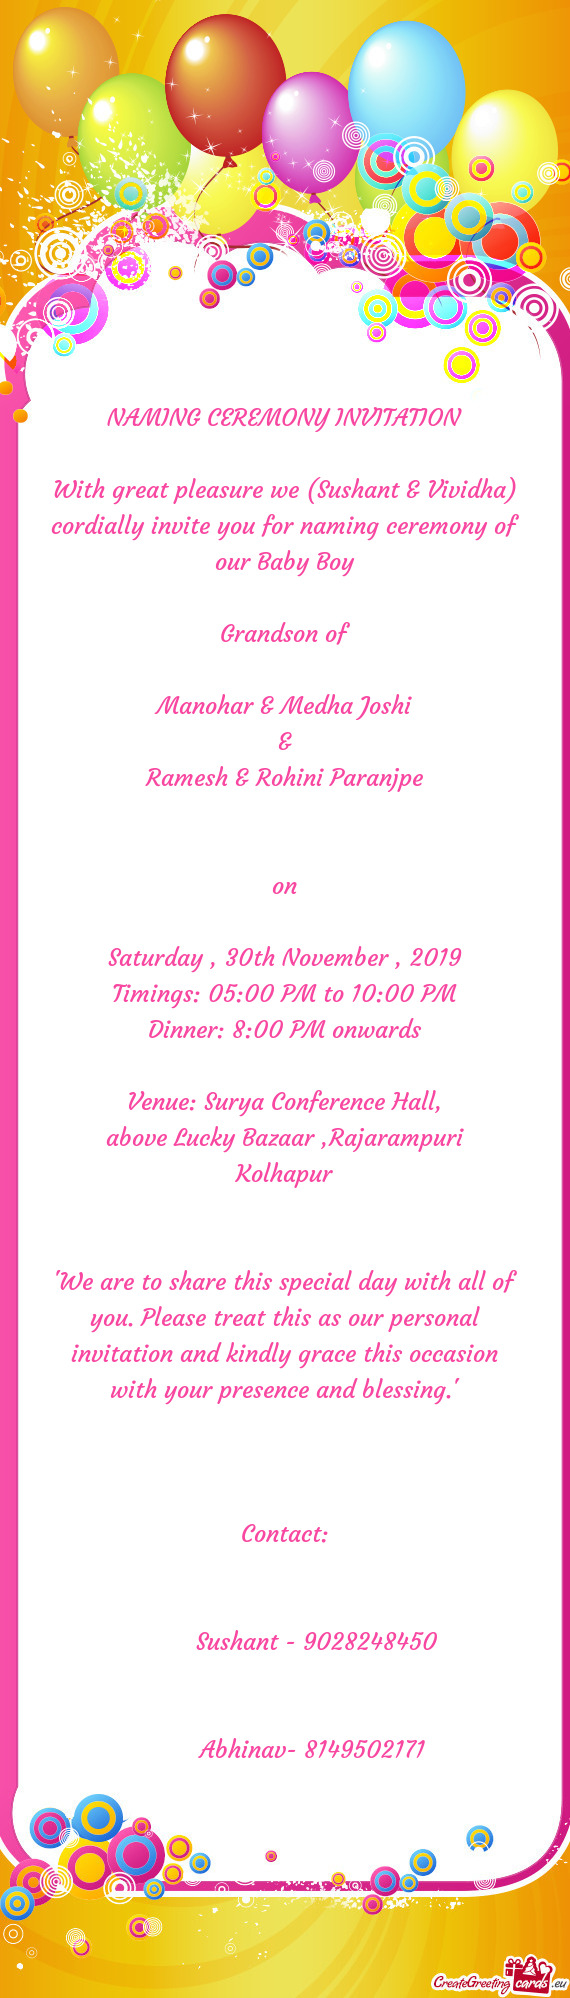 With great pleasure we (Sushant & Vividha) cordially invite you for naming ceremony of our Baby Boy